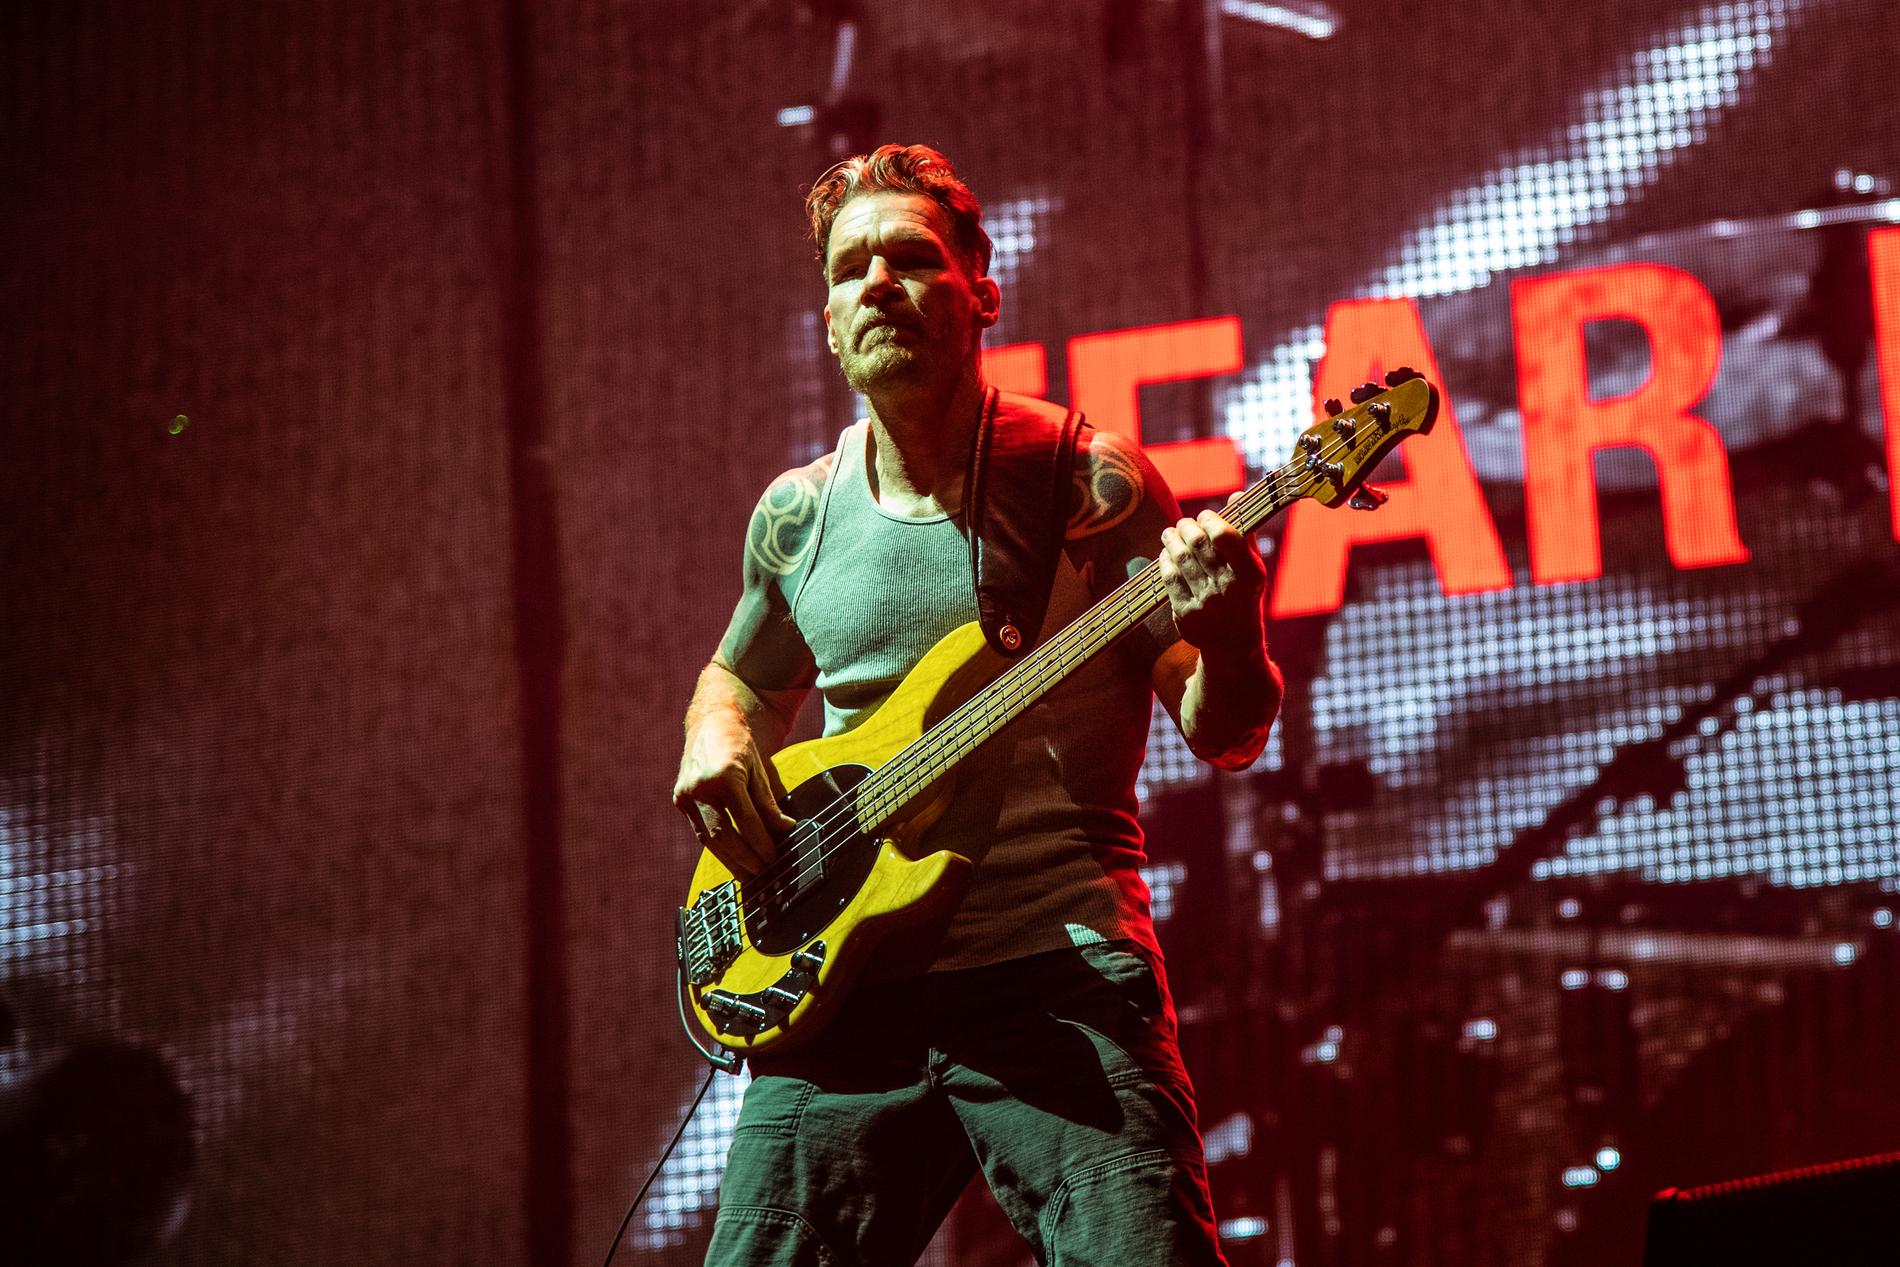  Tim Commerfor i Rage against the machine.